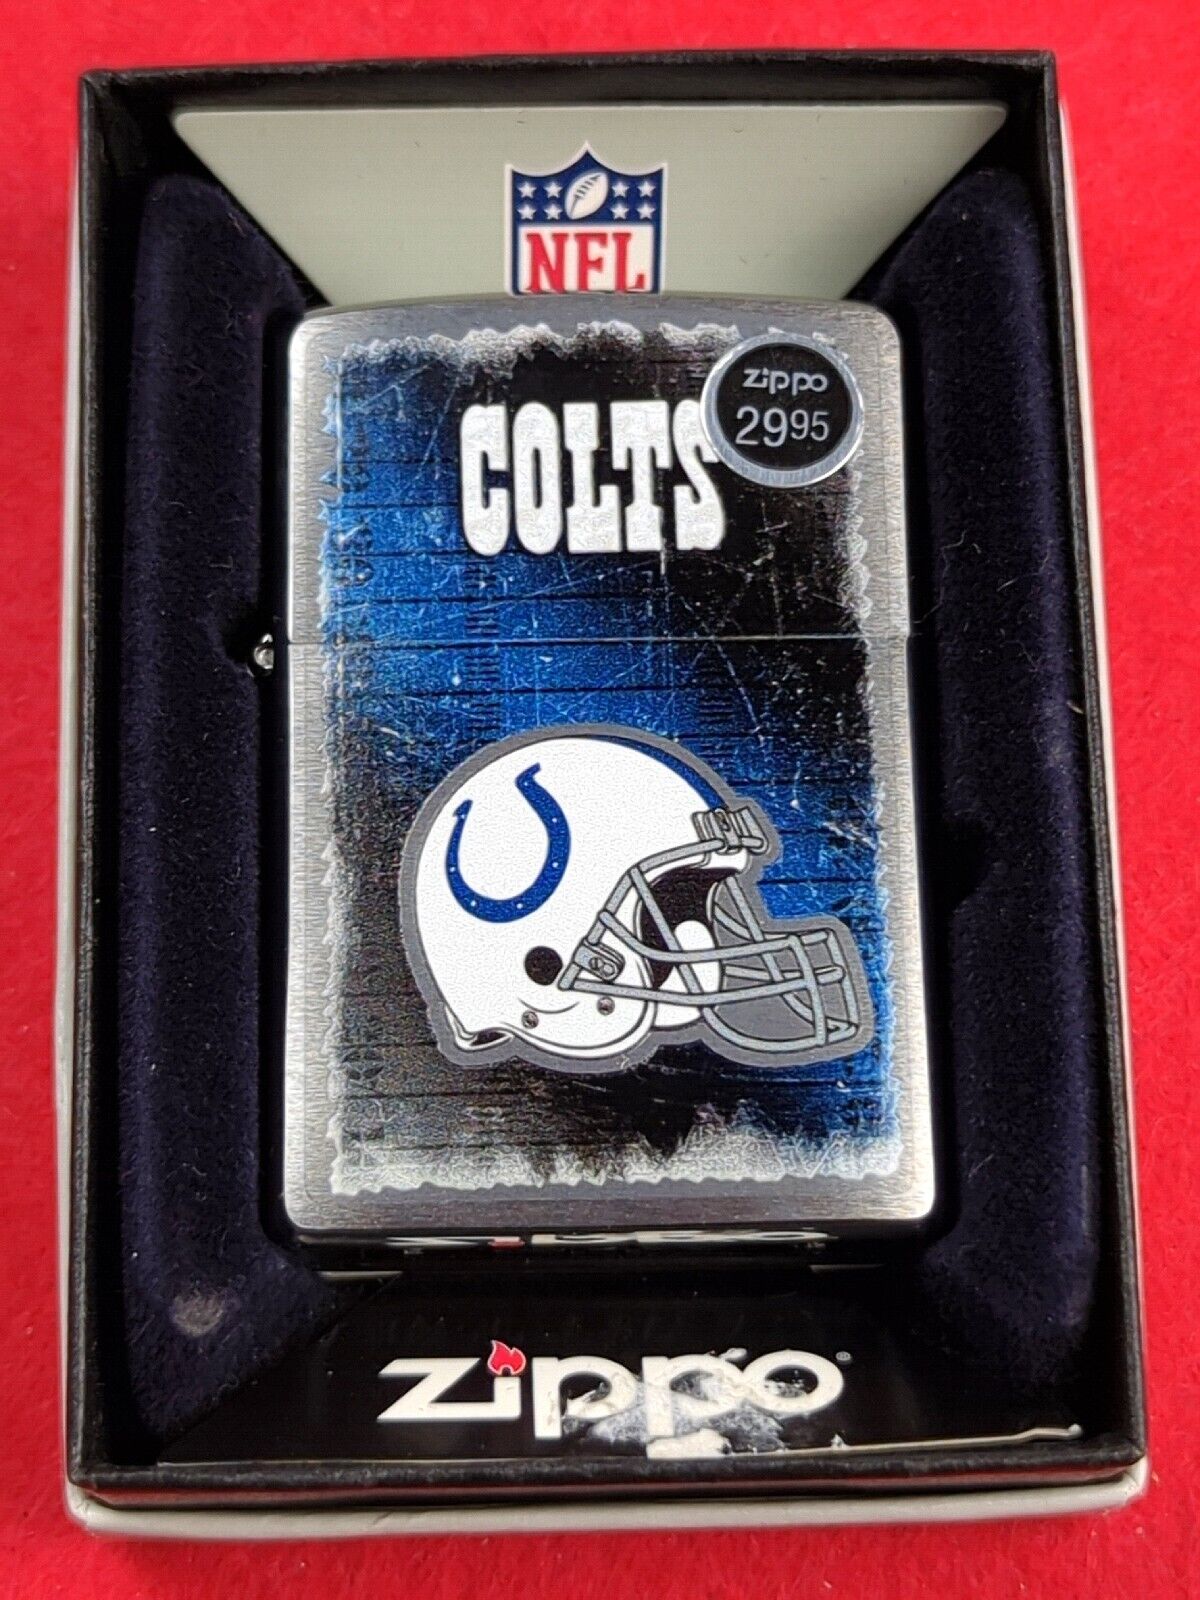 Zippo 28205 NFL INDIANAPOLIS COLTS on Brushed Chrome Lighter - MAY (E) 2012